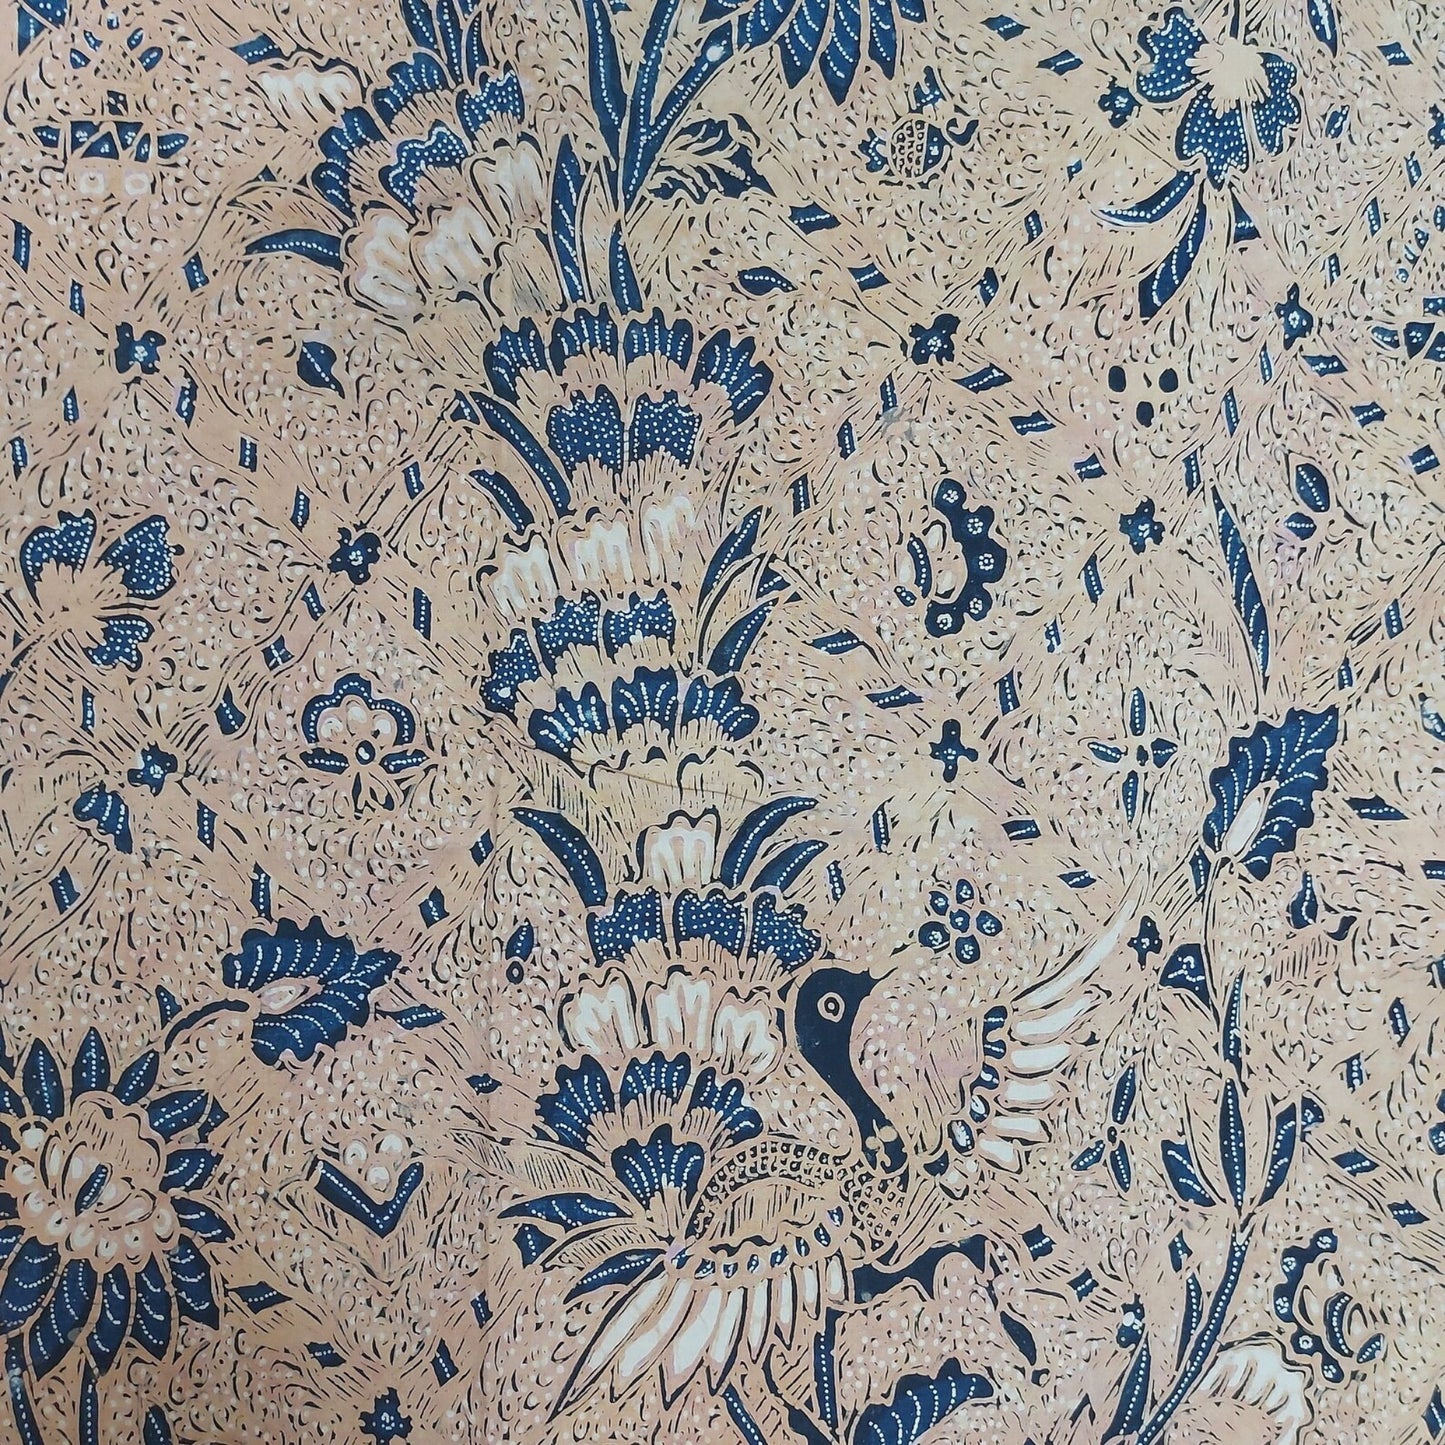 Old Indonesian Hand Drawn Classic Sogan Sidomukti Batik with Peacock and Flower Bouquet